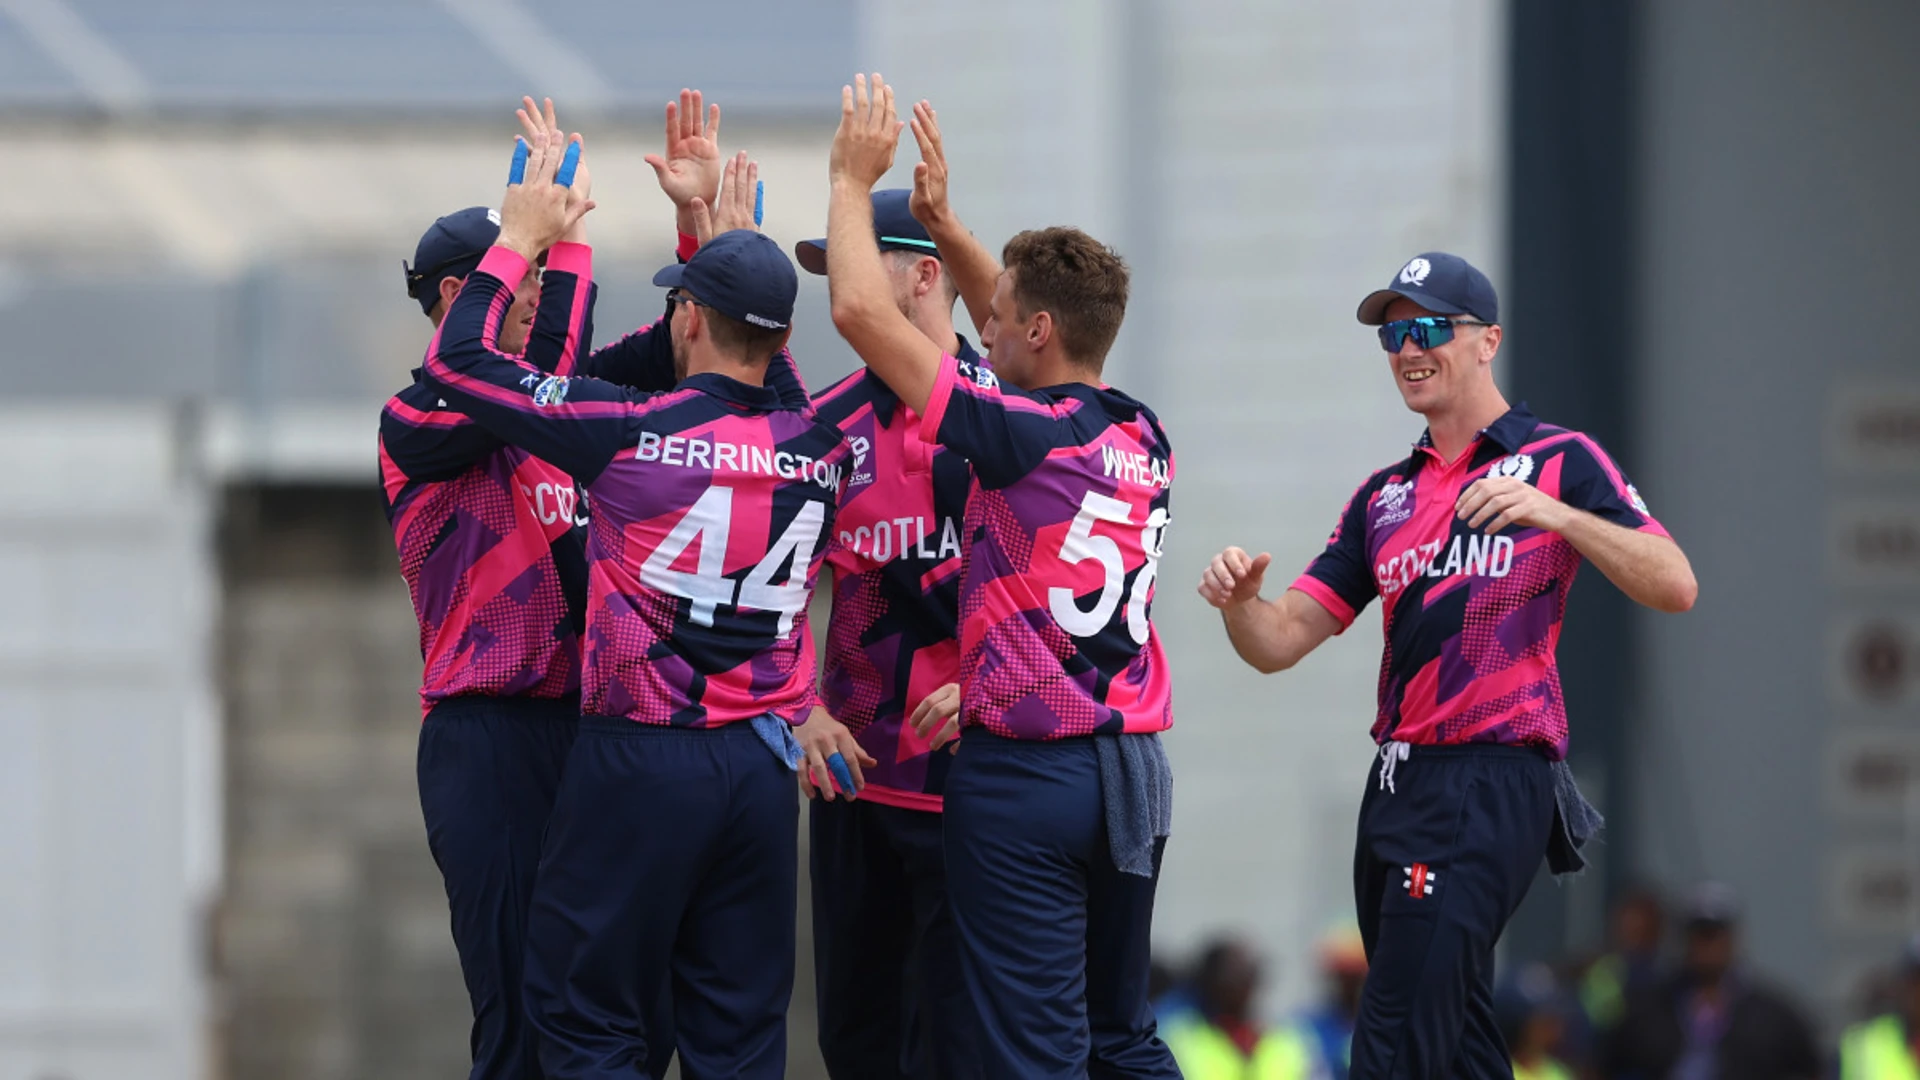 Berrington anchors Scotland to T20 World Cup win over Namibia